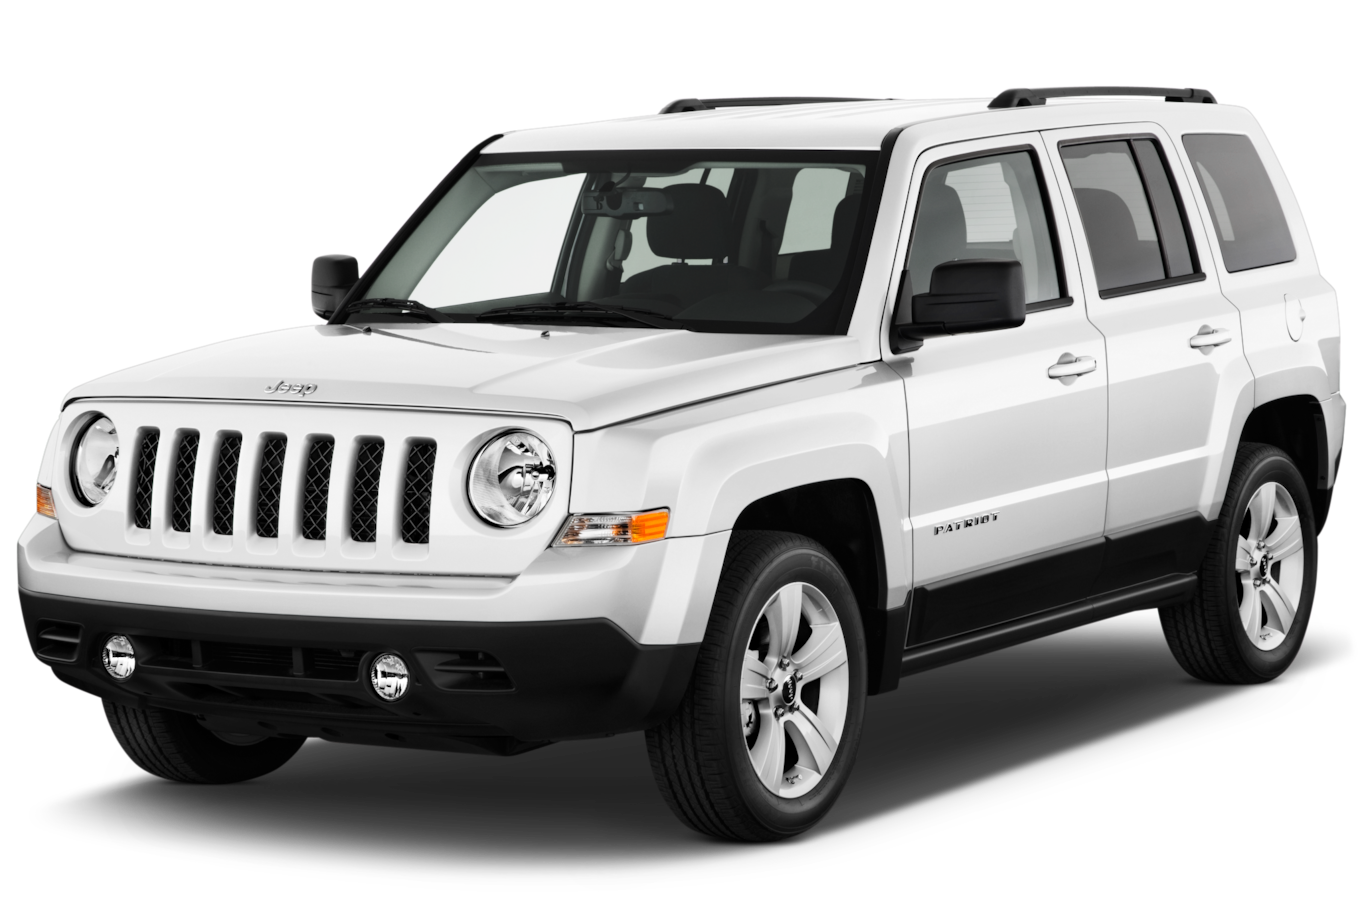 2016 Jeep Patriot Reviews and Rating Motor Trend